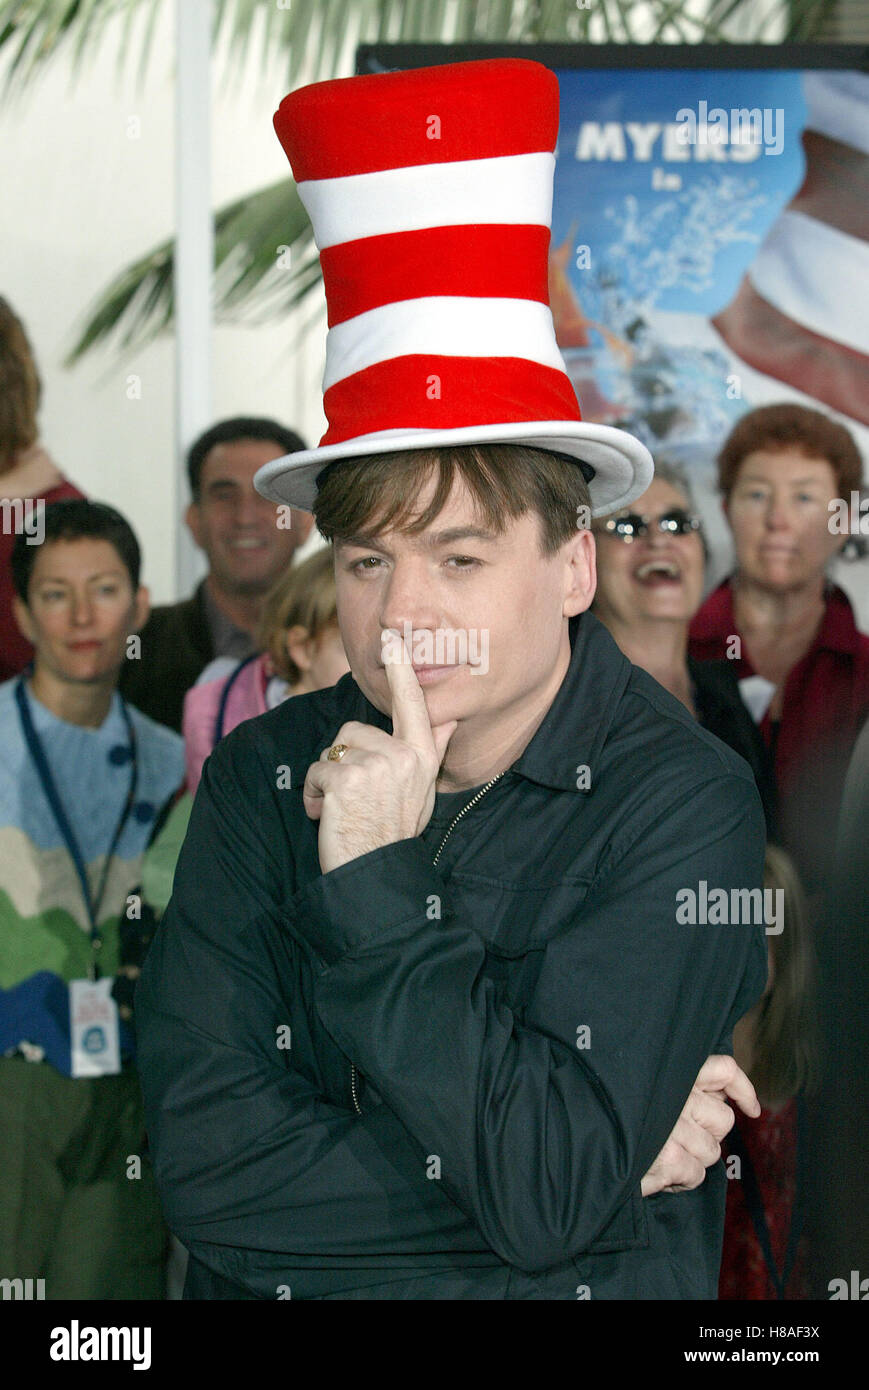 MIKE MYERS DR. SEUSS' THE CAT IN THE HAT CITYWALK UNIVERSAL STUDIOS LA USA 08 November 2003 Stock Photo